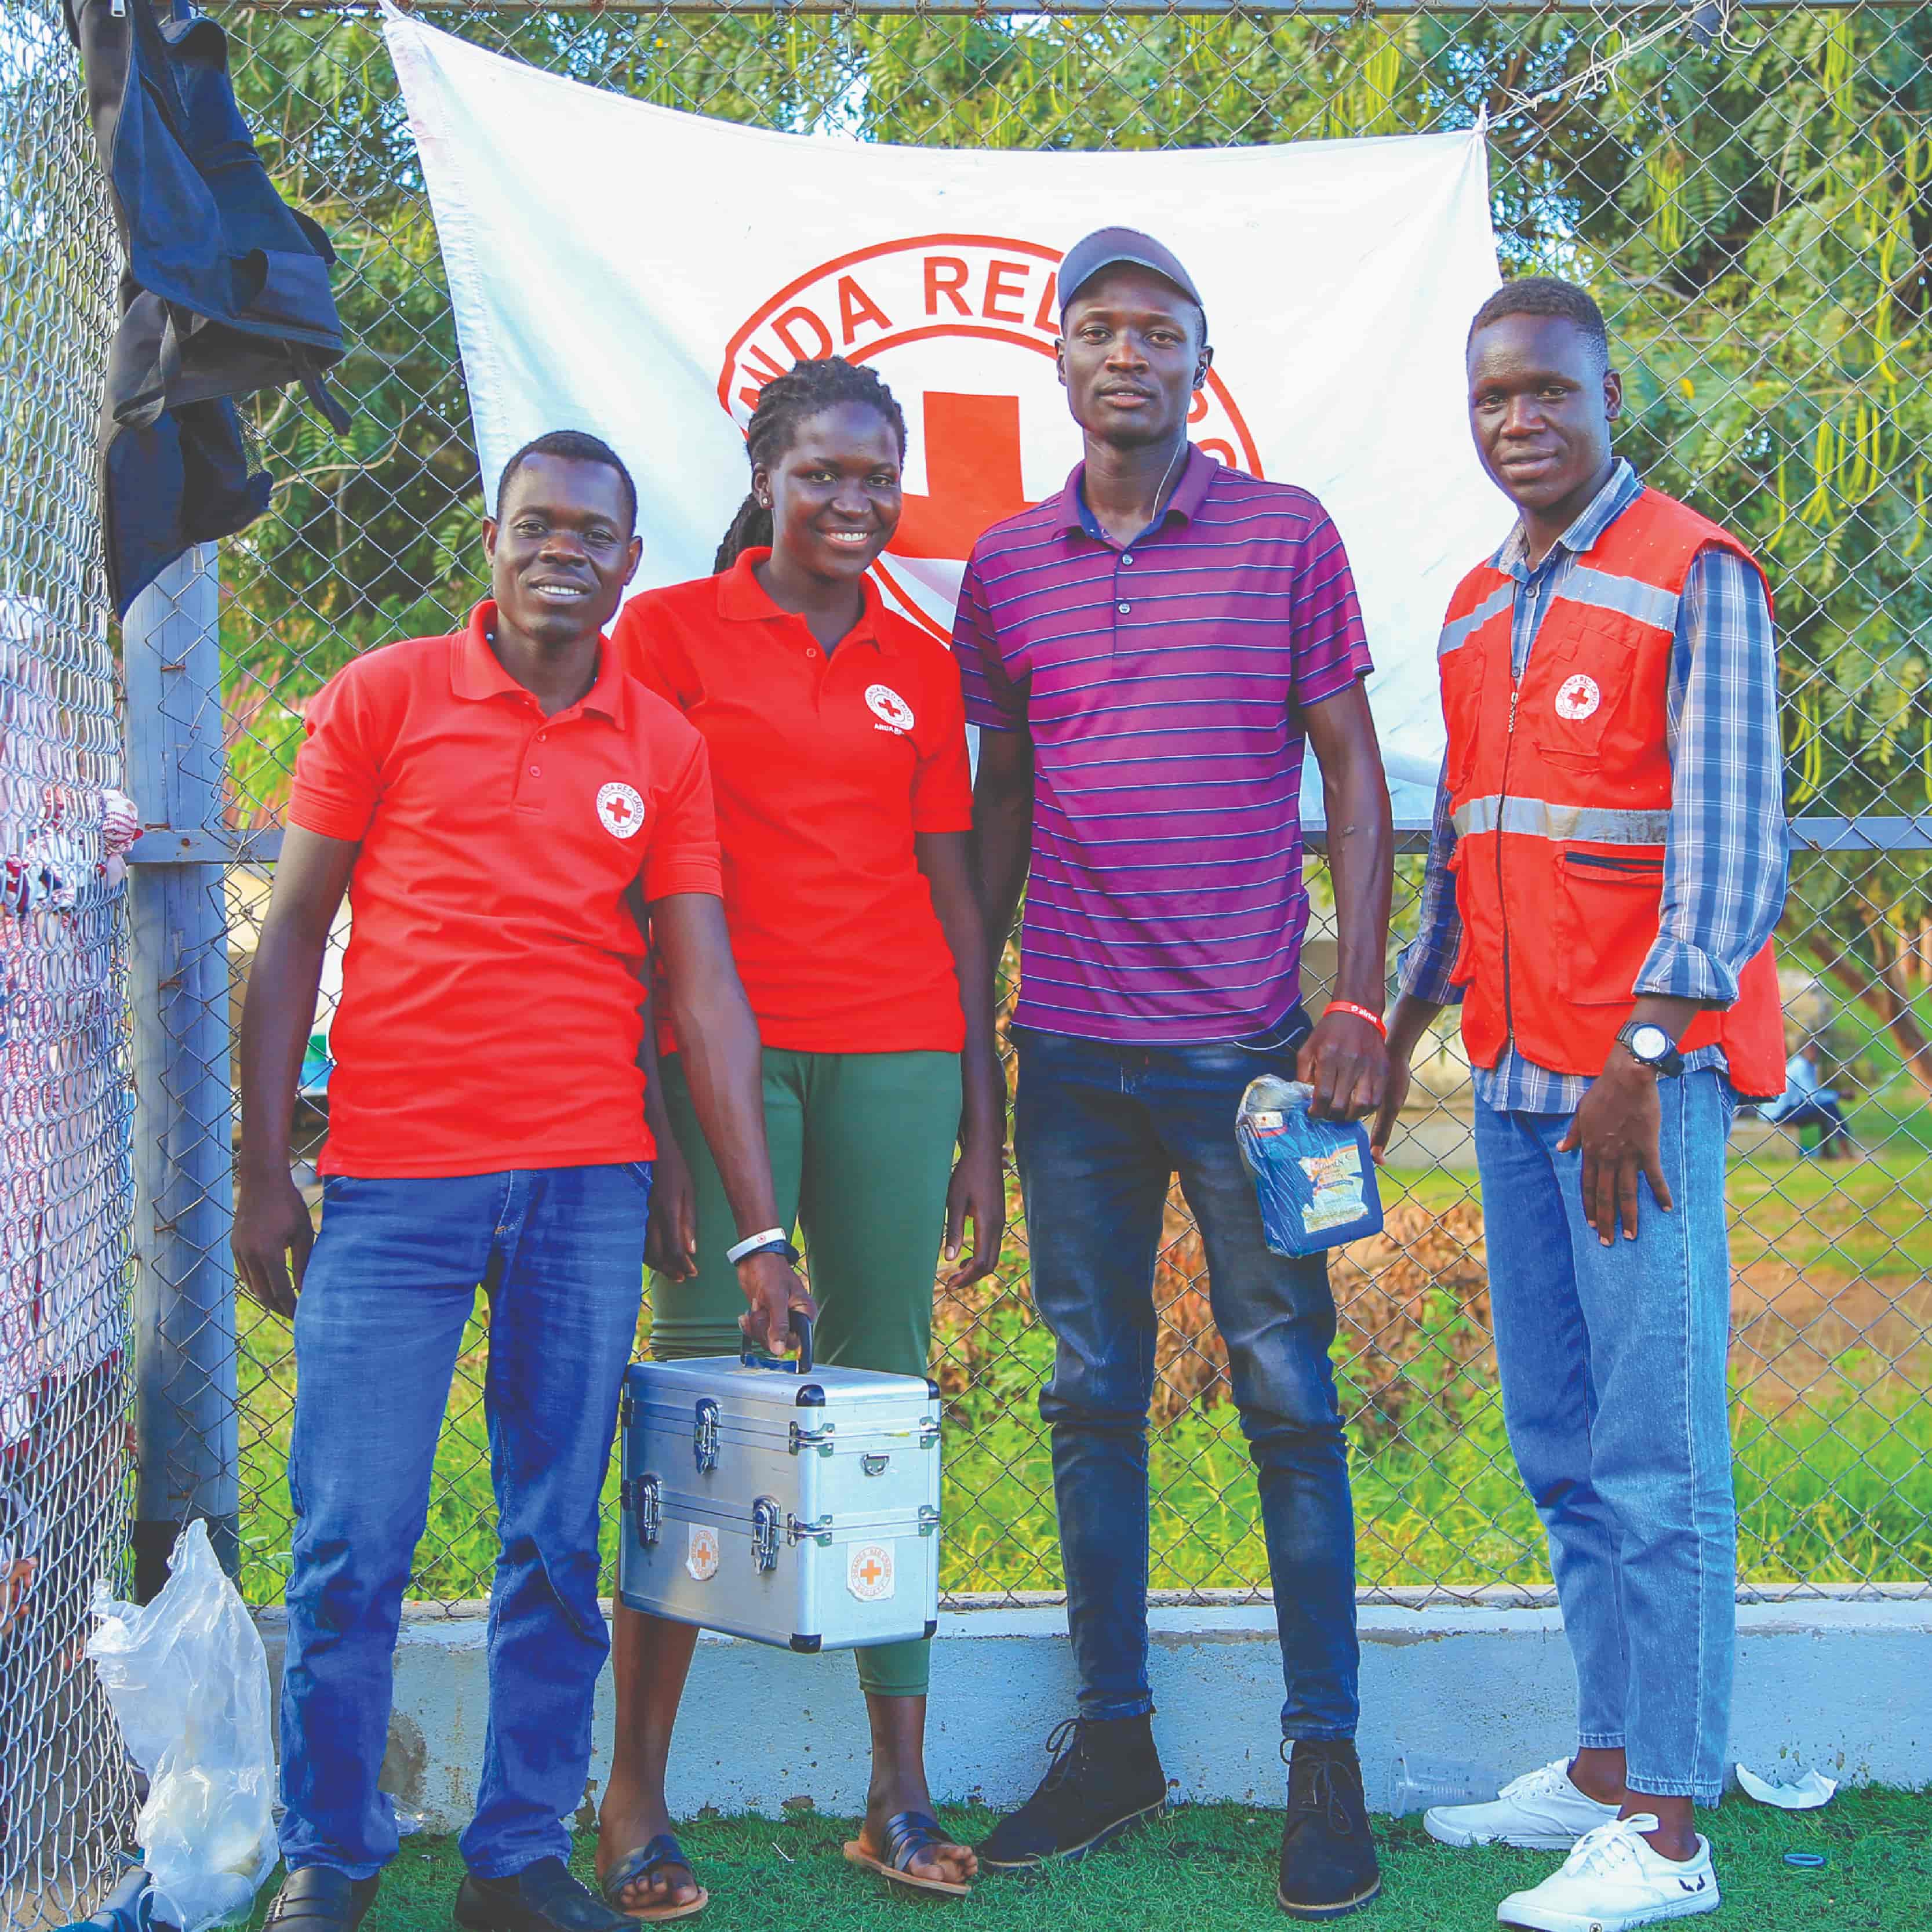 Image of three soccer fans standing